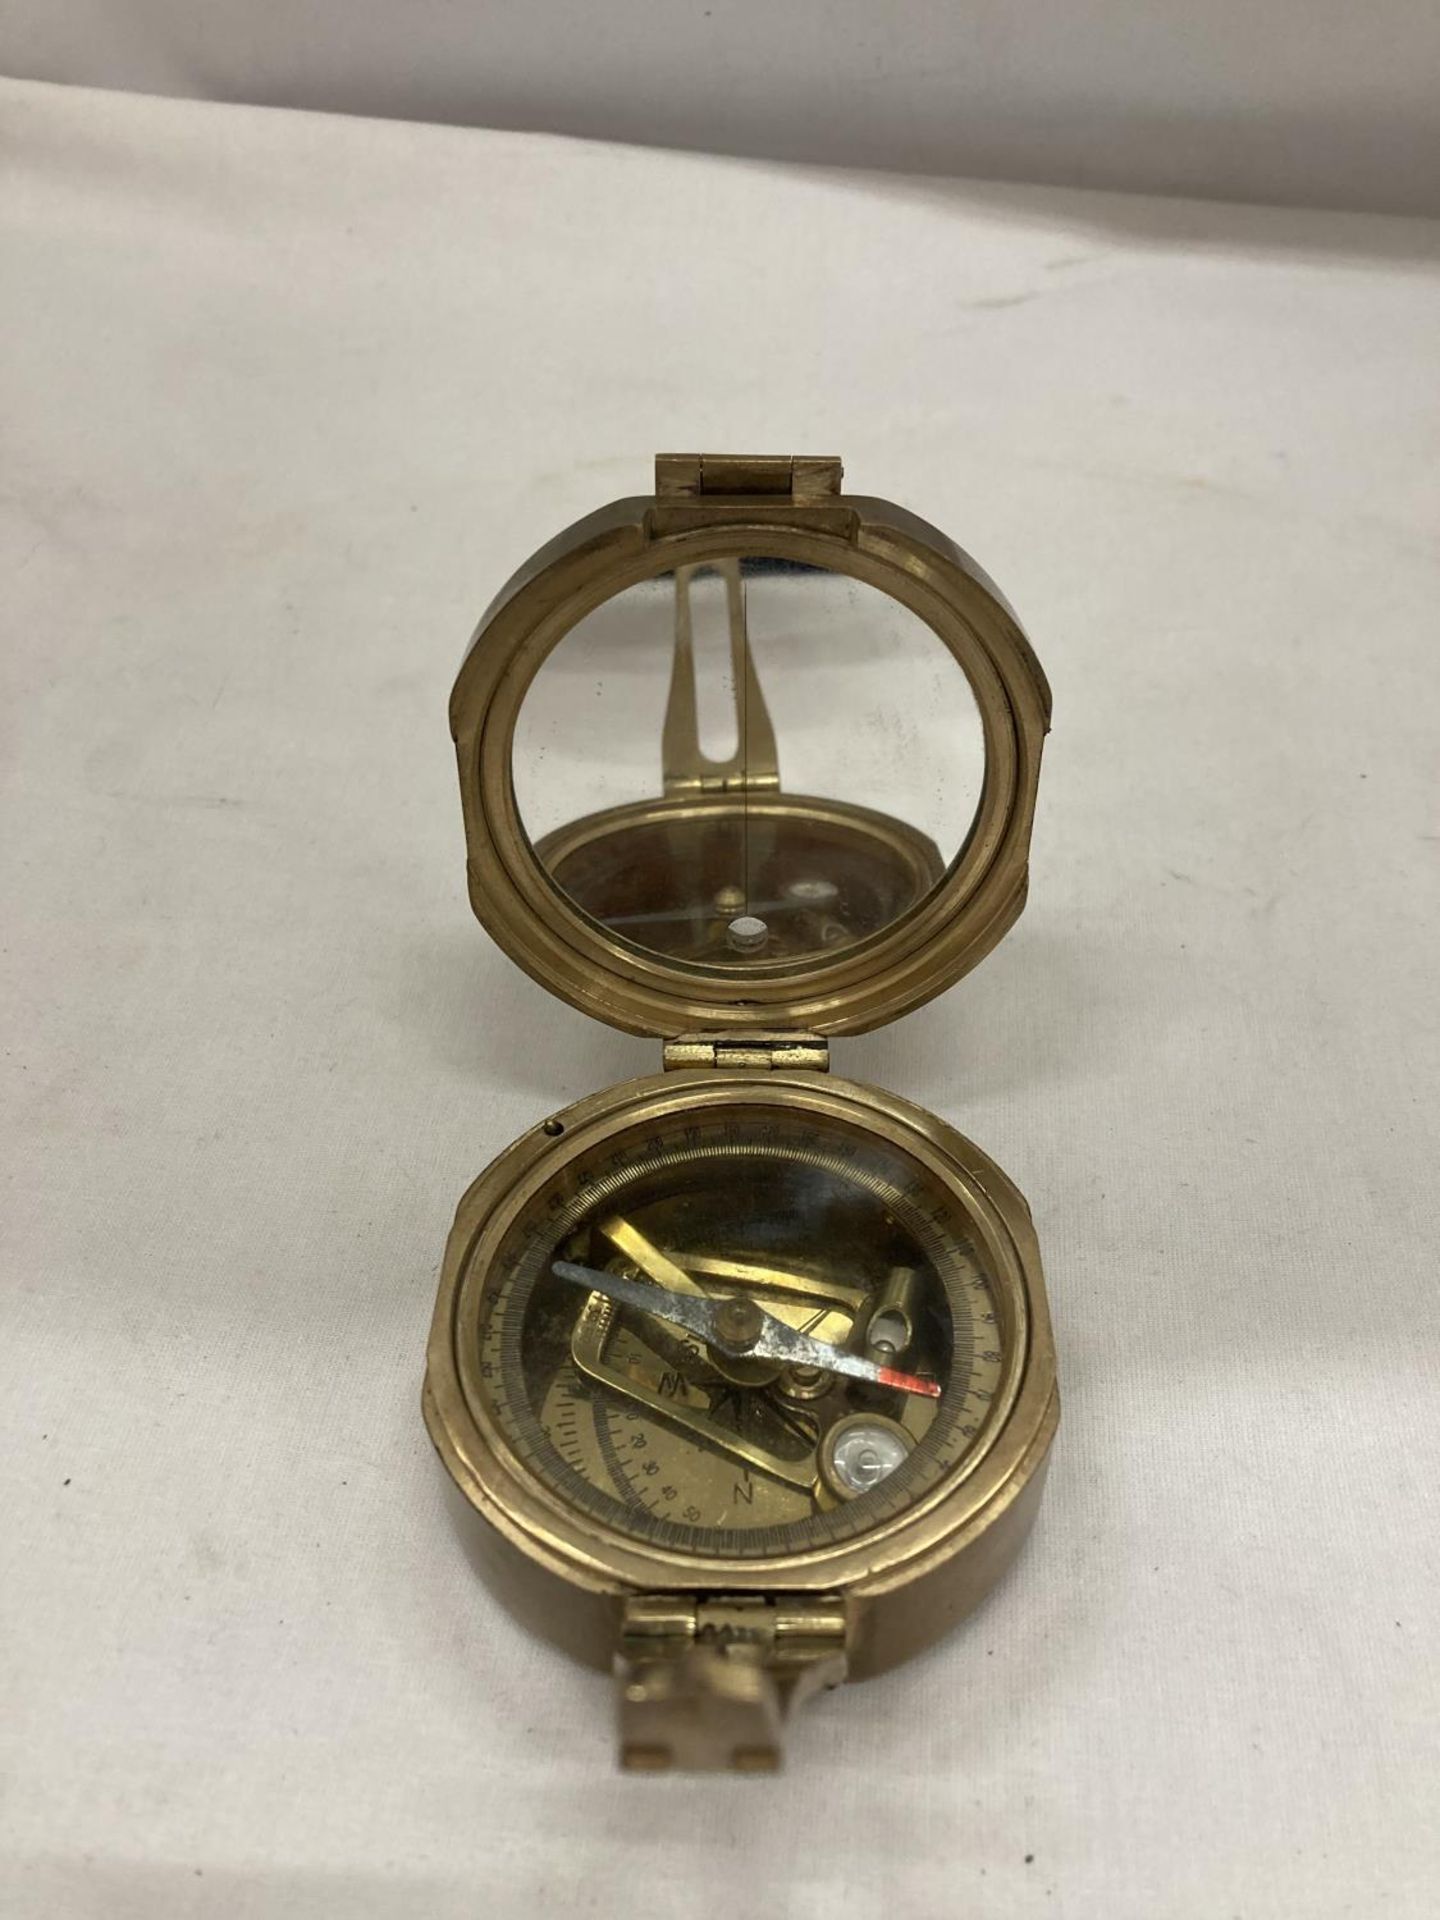 A POLISHED BRASS BRUNTON STYLE EXPLORERS' COMPASS - Image 5 of 5